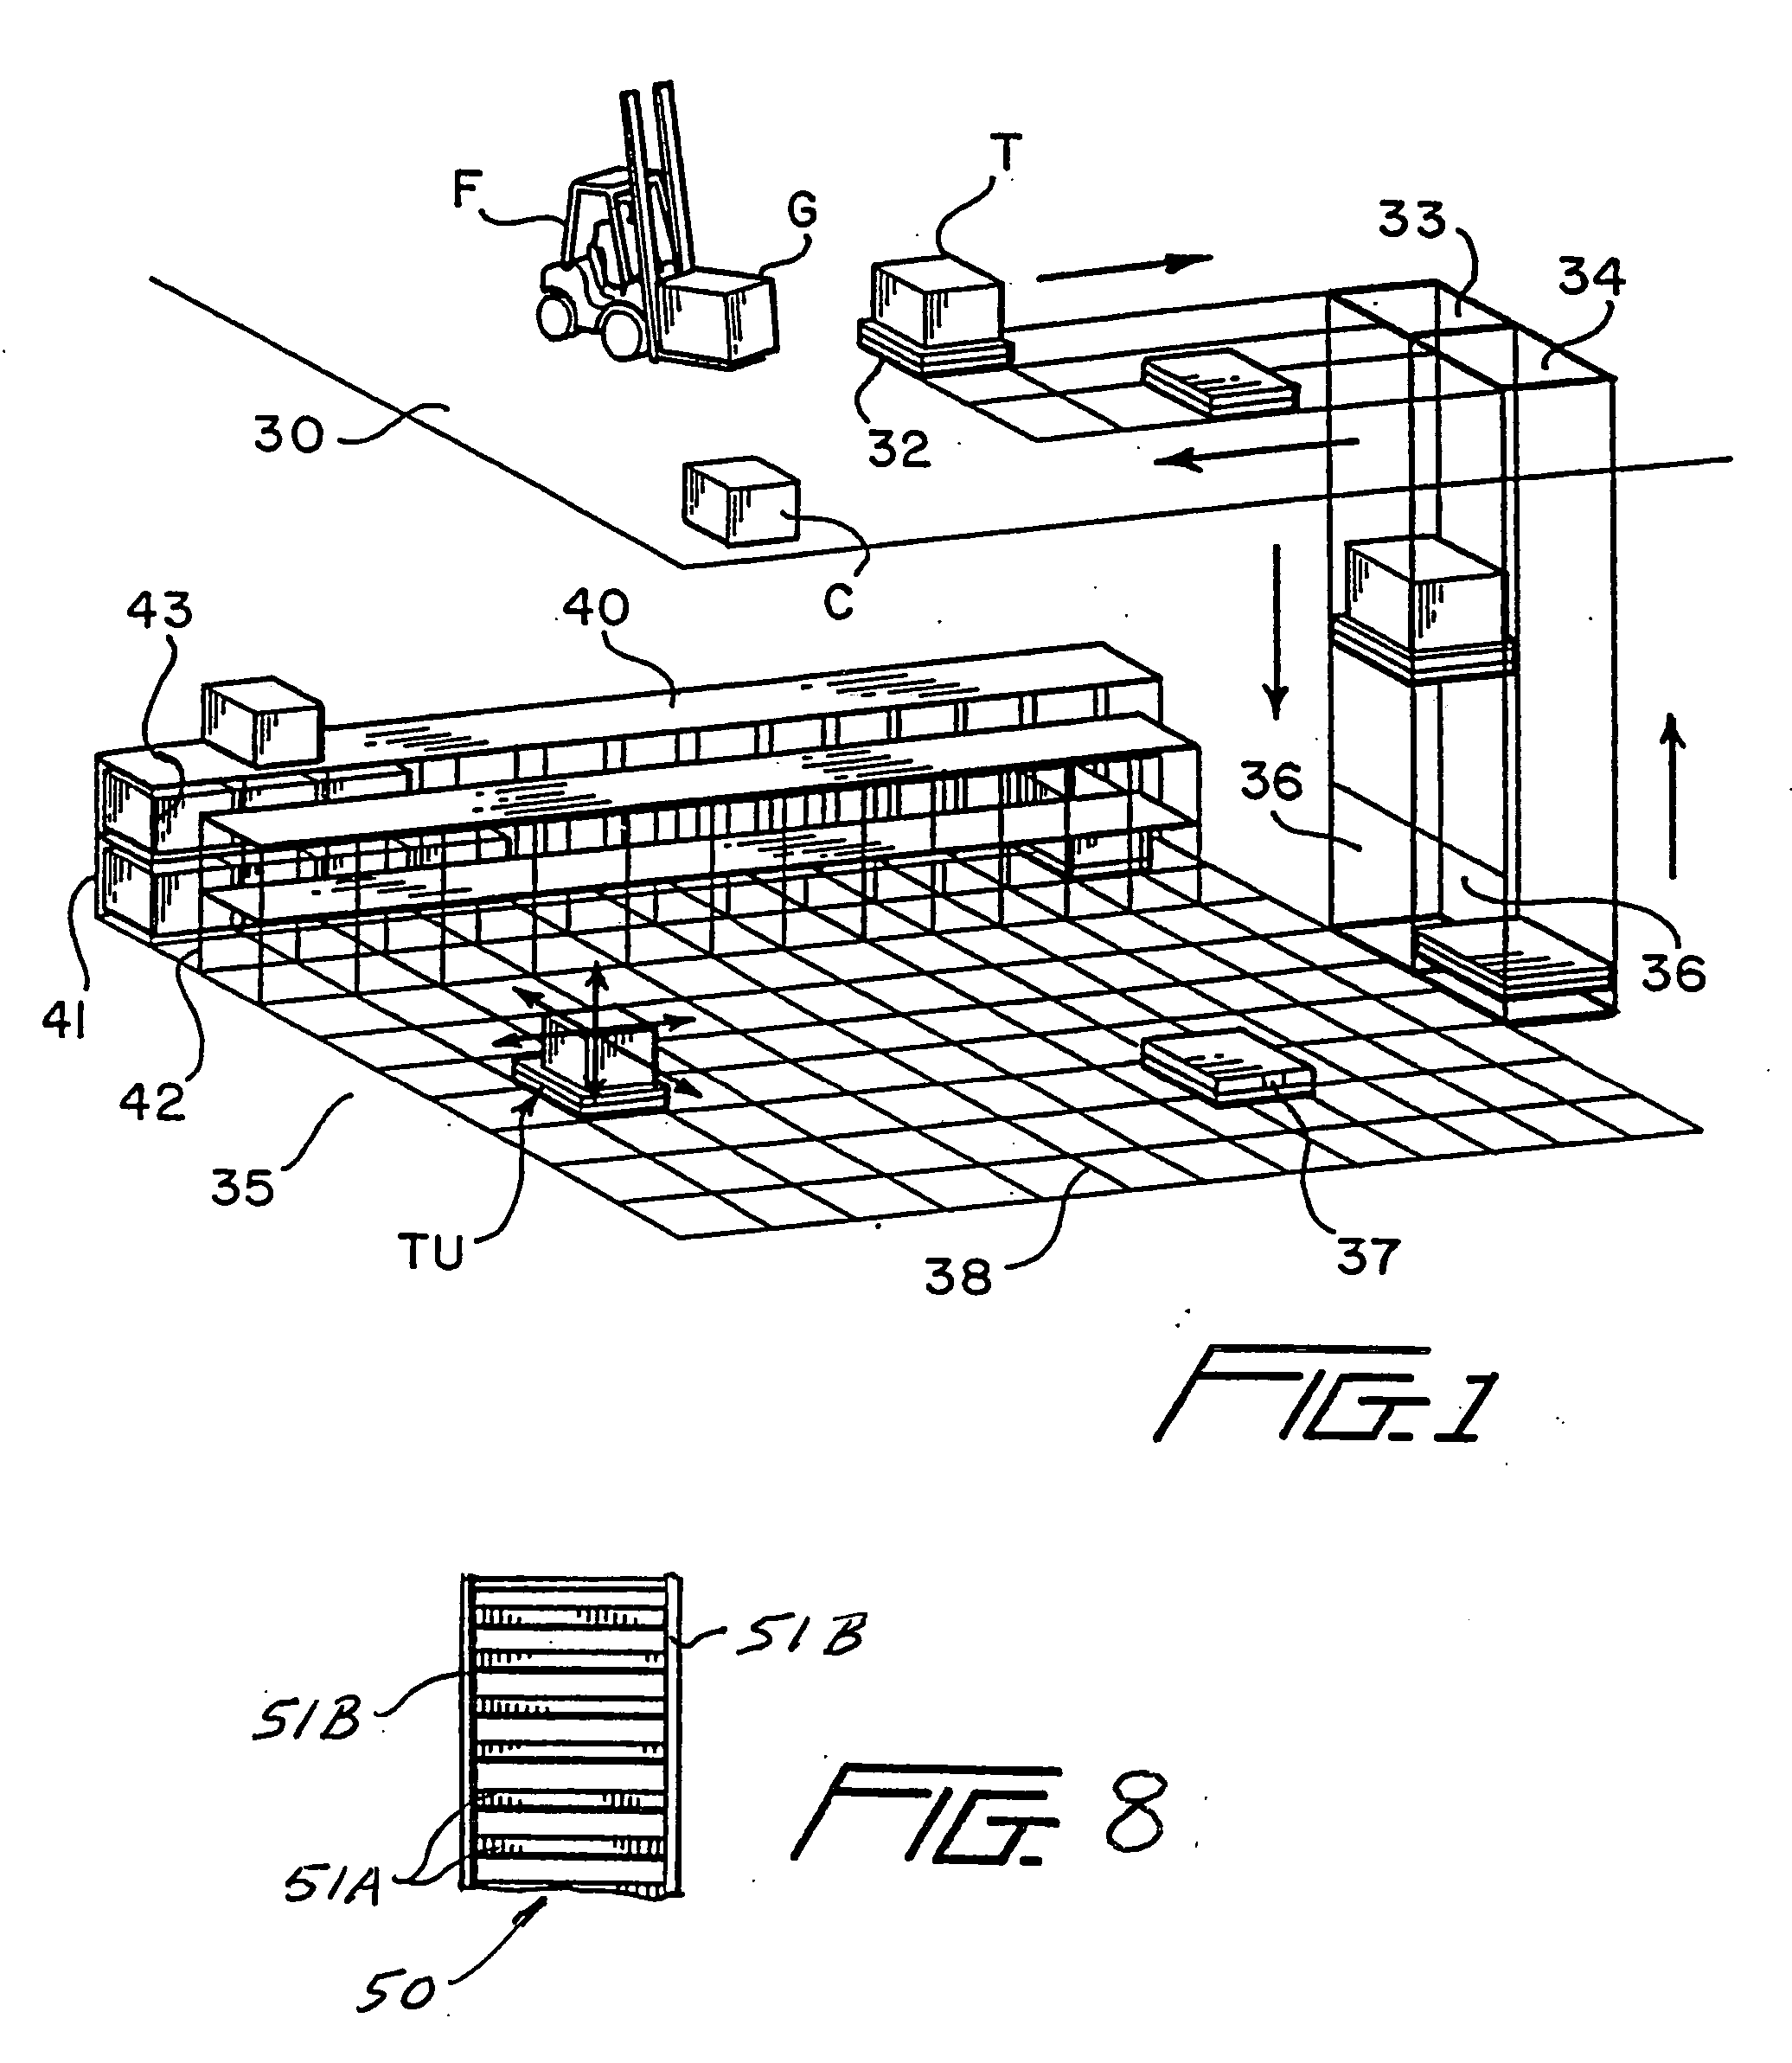 Automated material handling system with load transfer vehicles